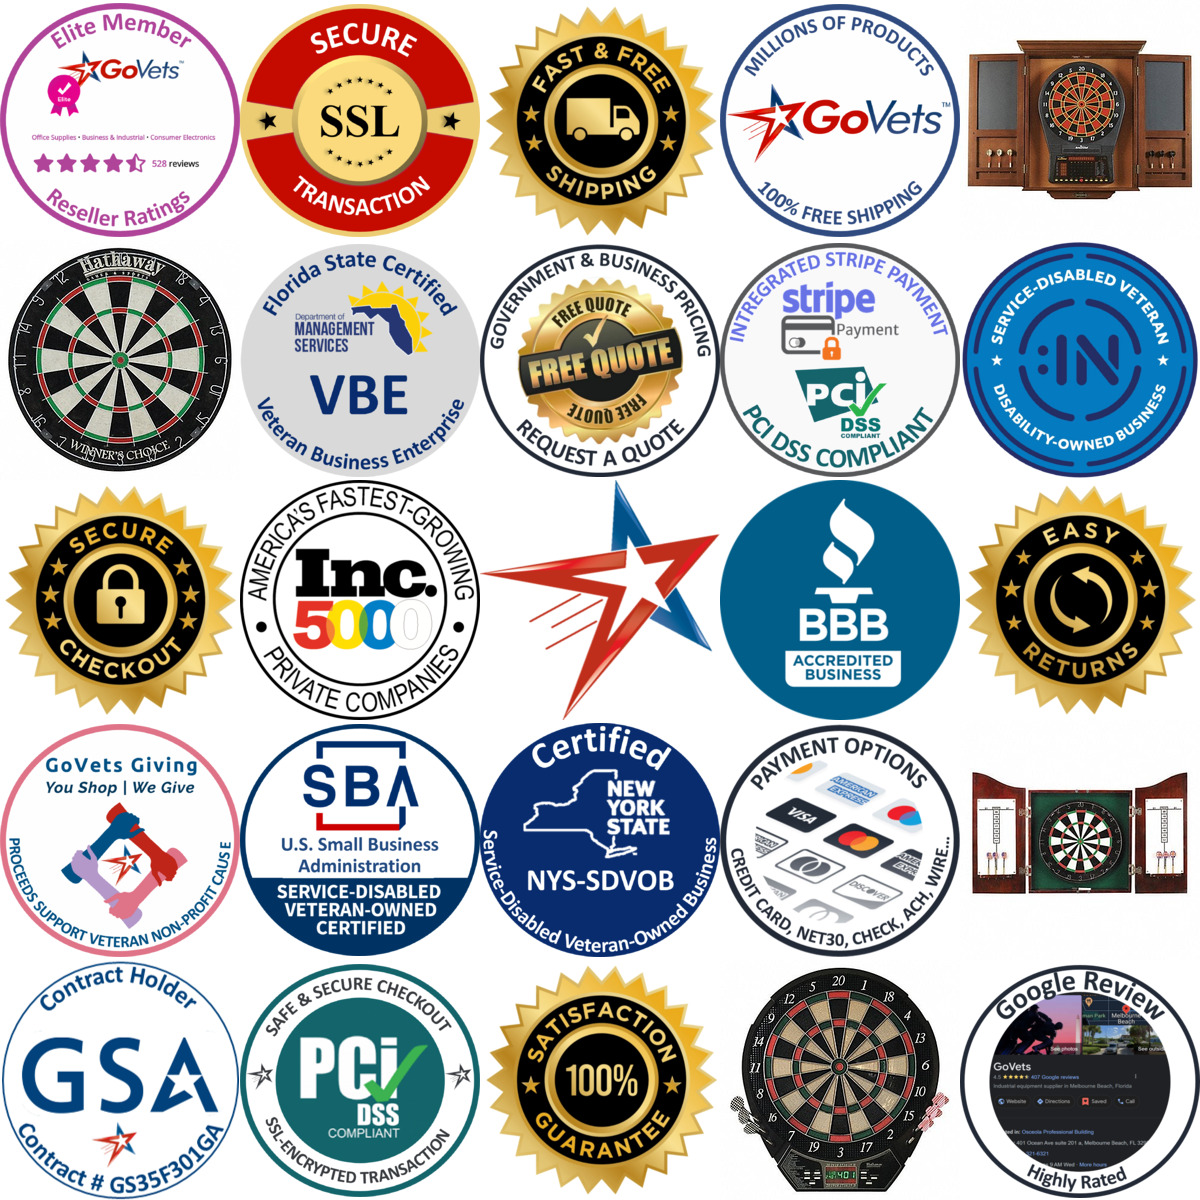 A selection of Dartboards and Dartboard Cabinets products on GoVets